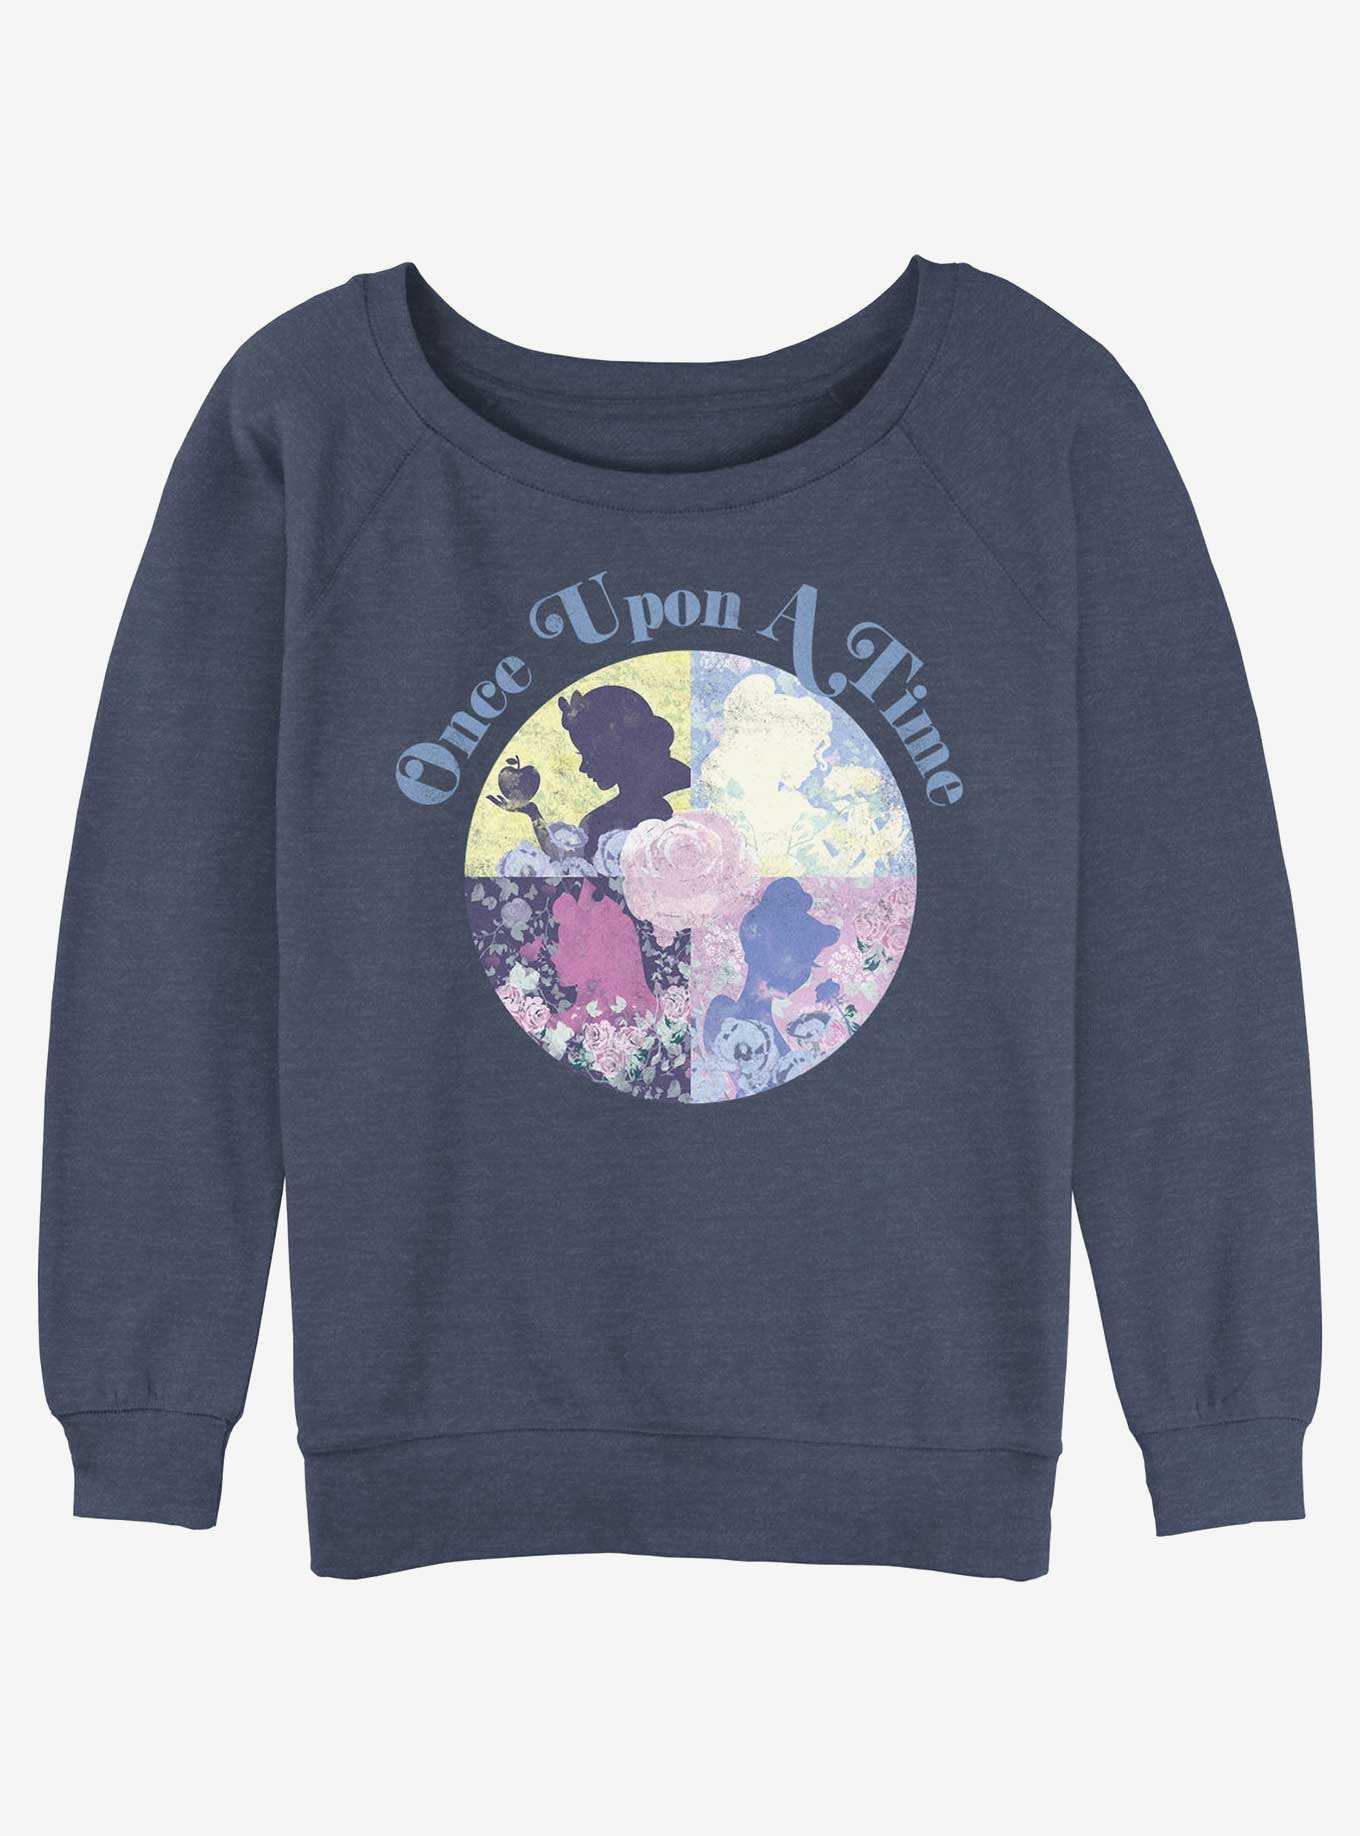 Disney Princesses Once Upon A Time Girls Slouchy Sweatshirt, , hi-res